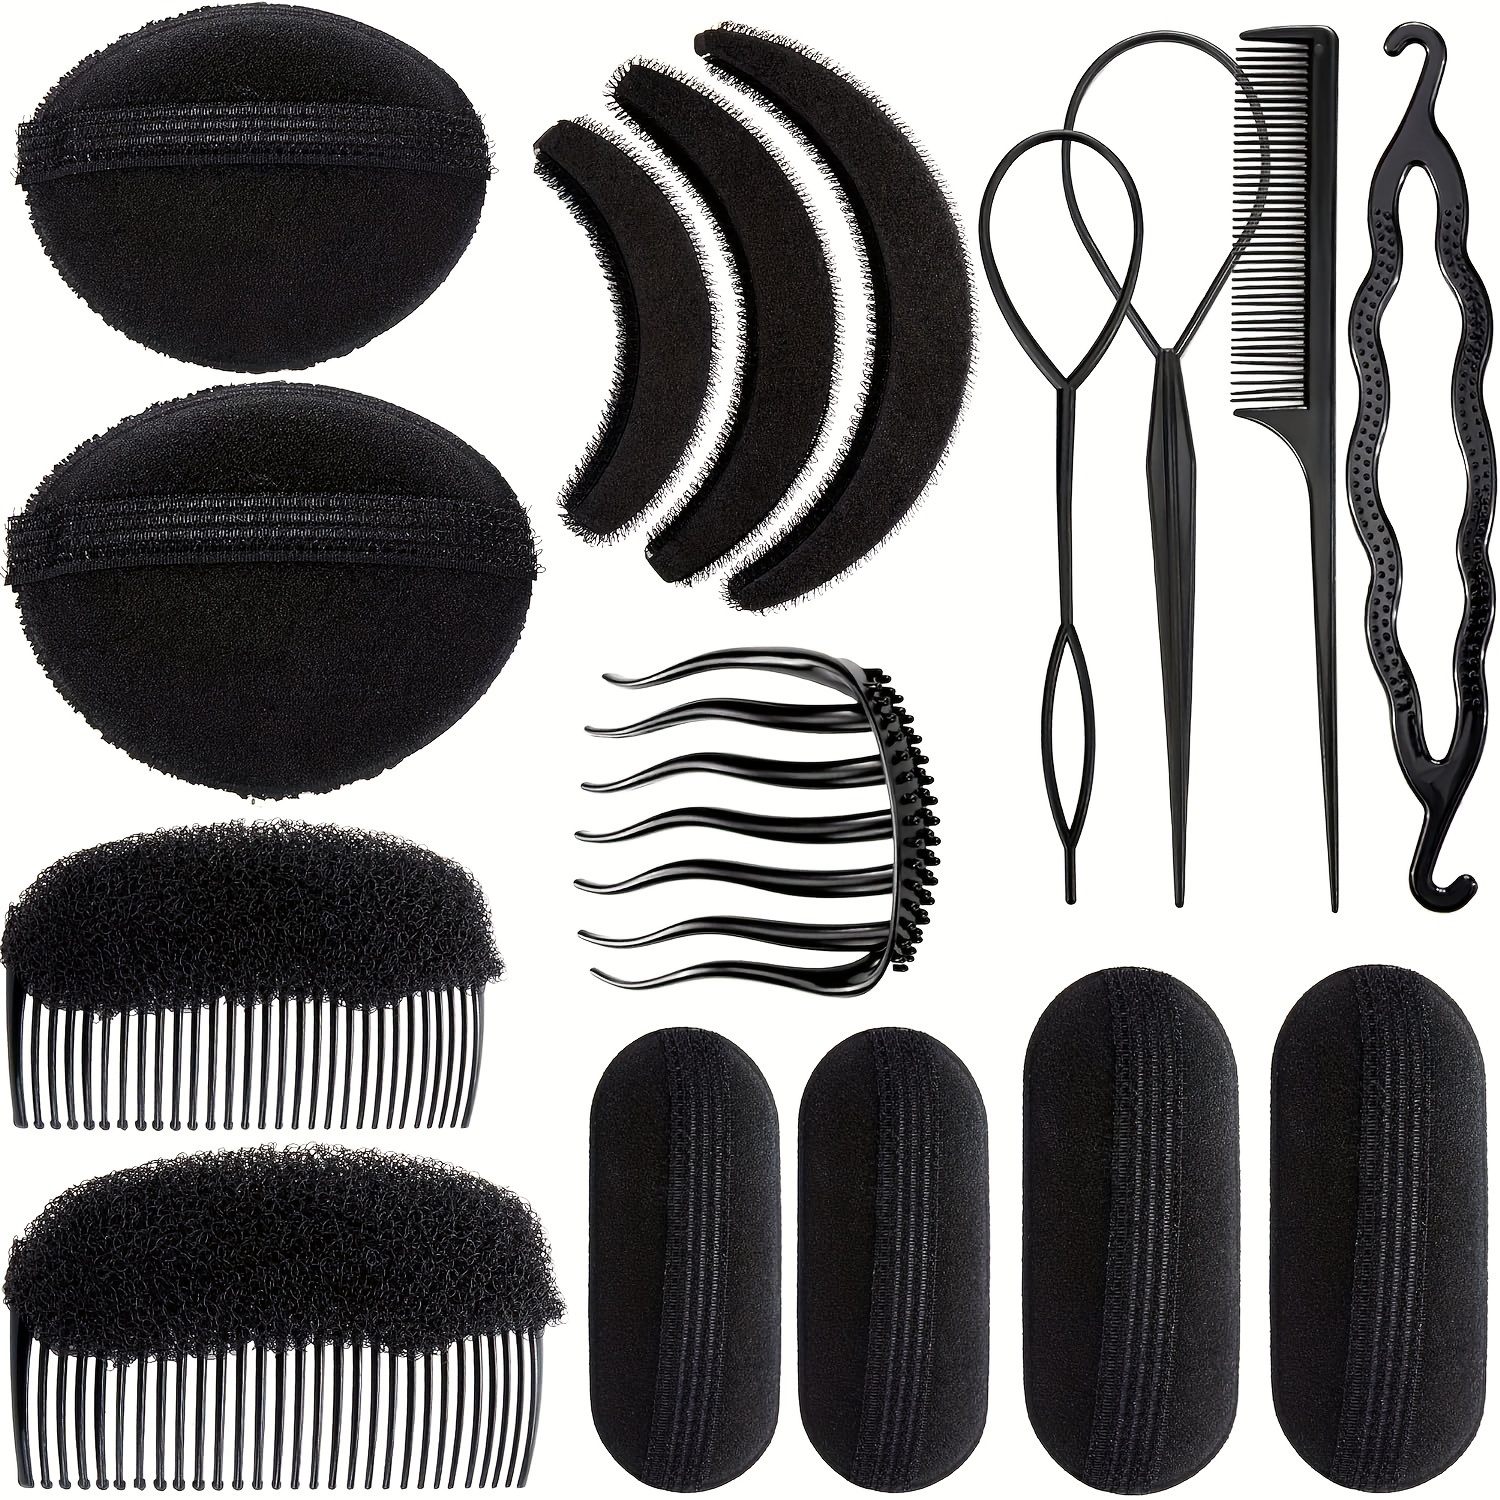 

16 Pcs Hair Sponge Bump Up Volume Inserts Tool Simple Hair Braid Tools Hair Bases Hair Bump Up Combs Clips Hair Styling Tools Sponge Hair Accessories For Women Hair Styling